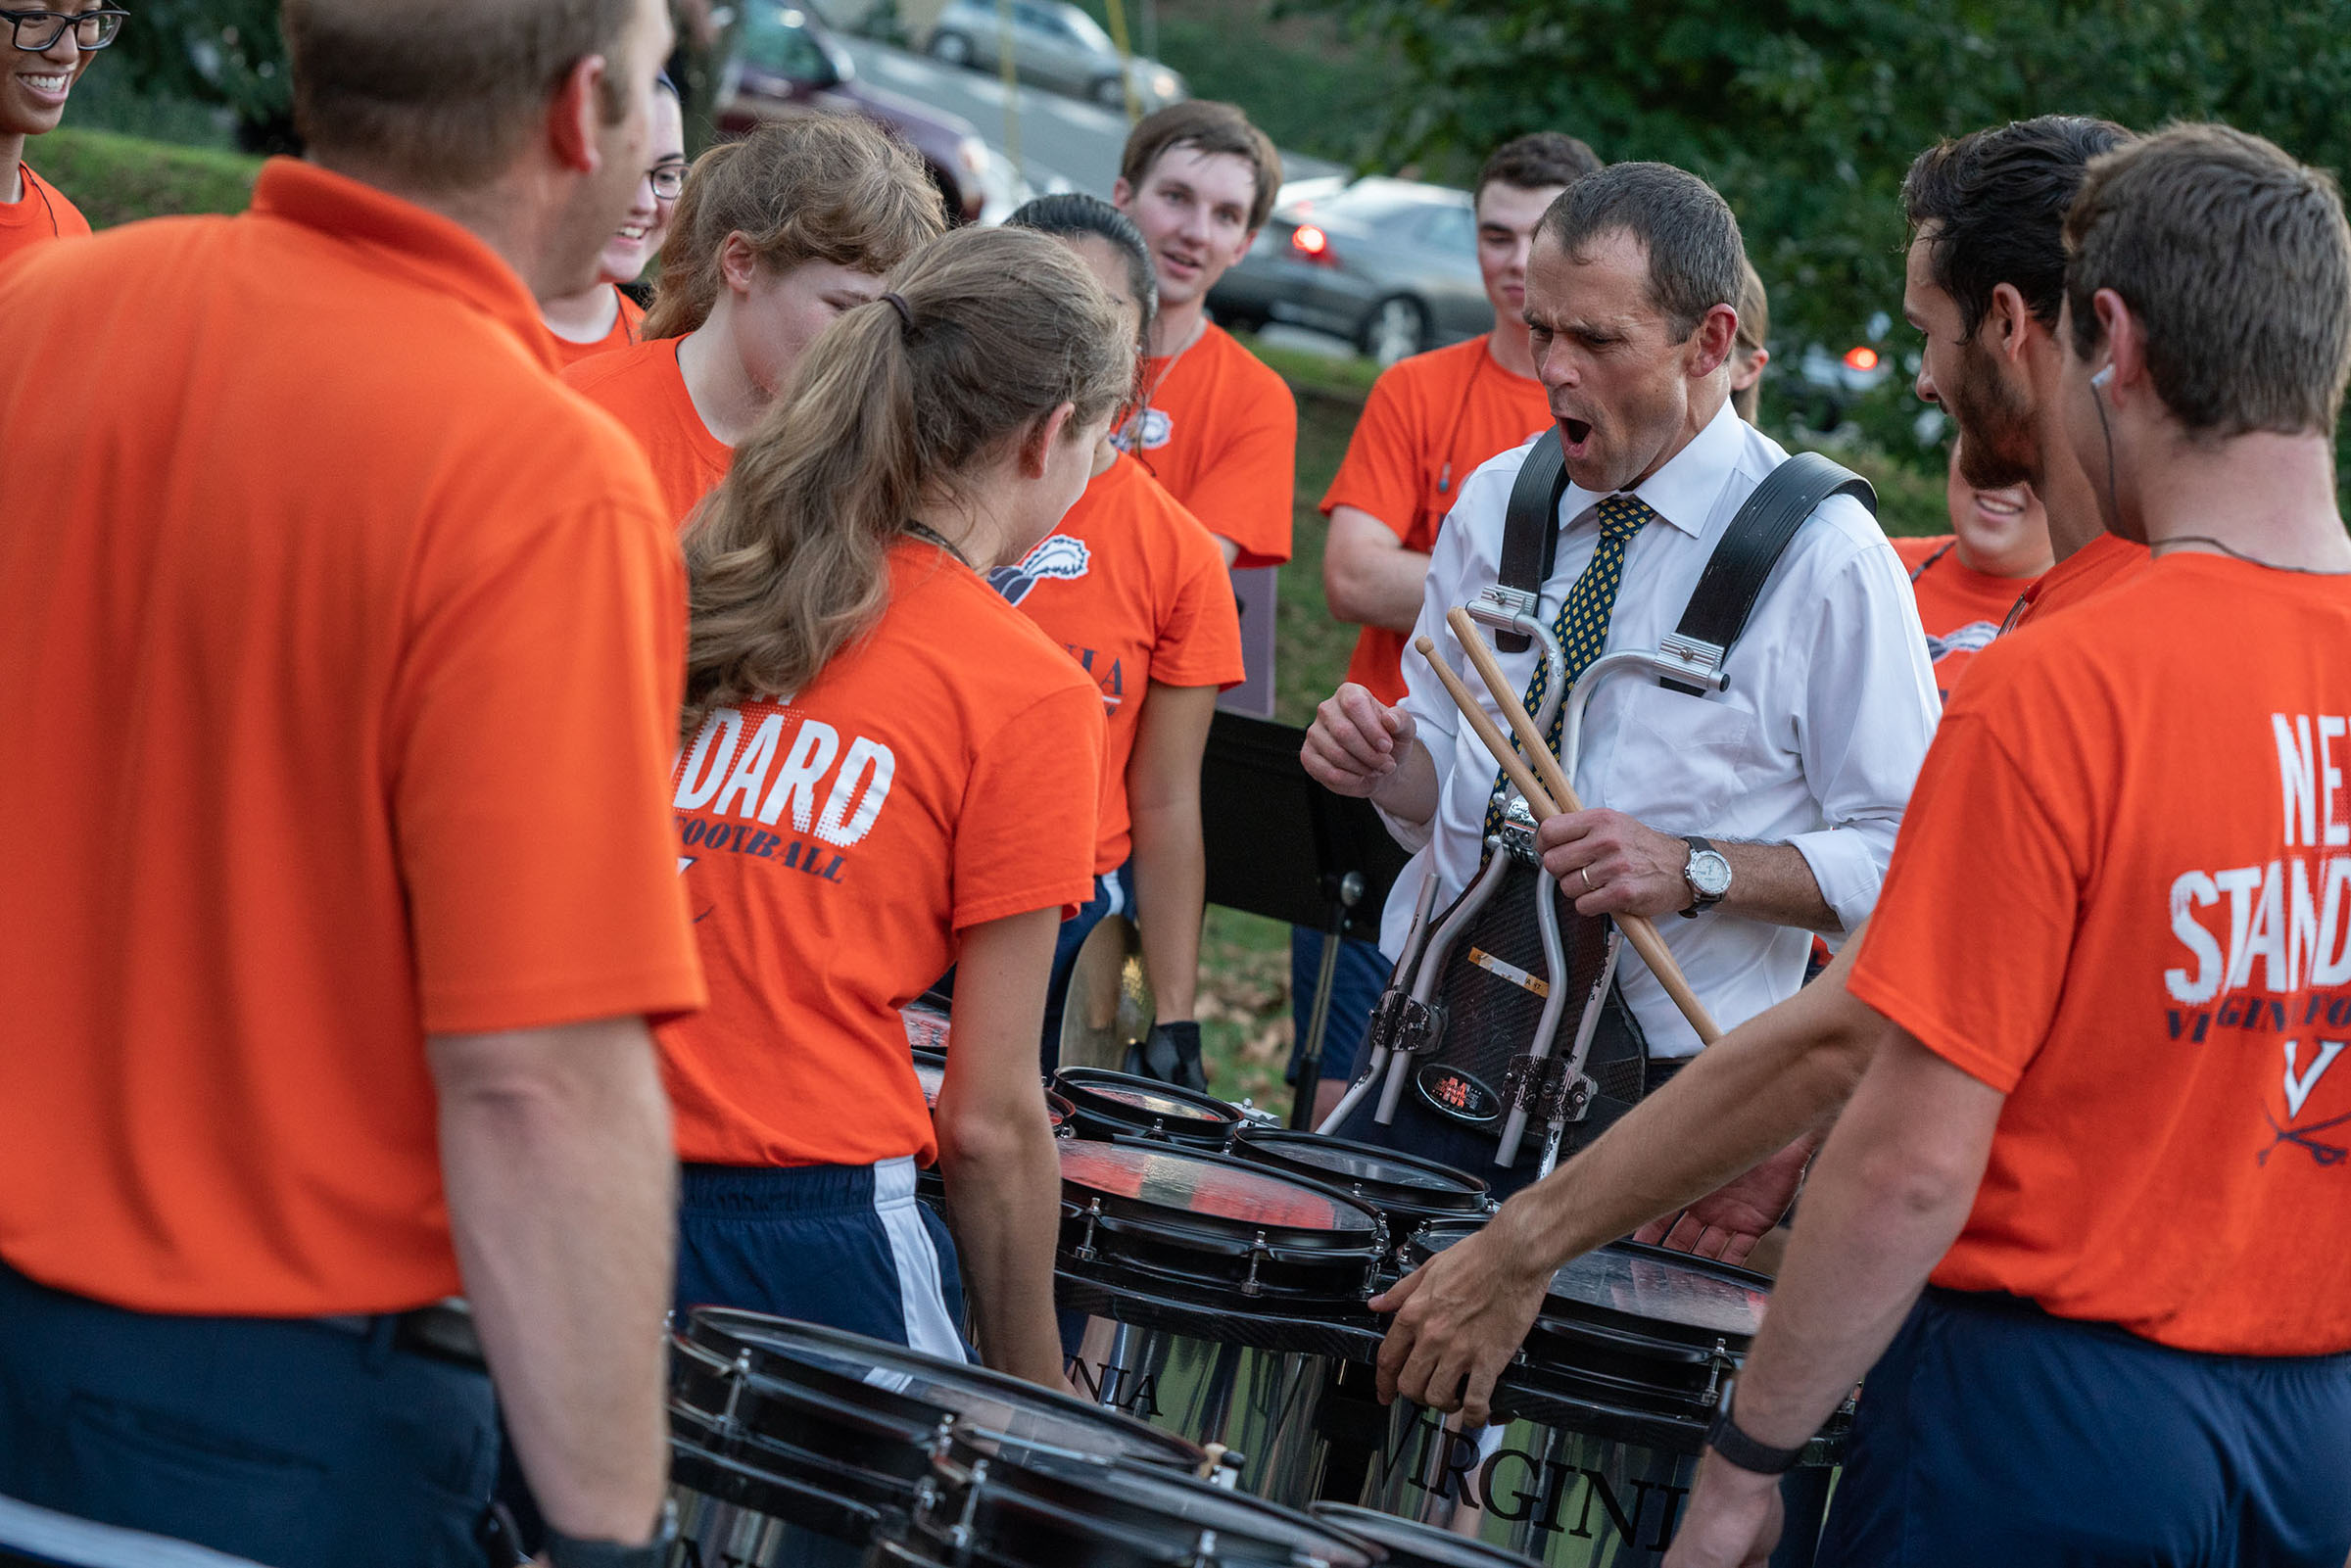 President Jim Ryan carrying a marching band drum while making a face like he is in pain